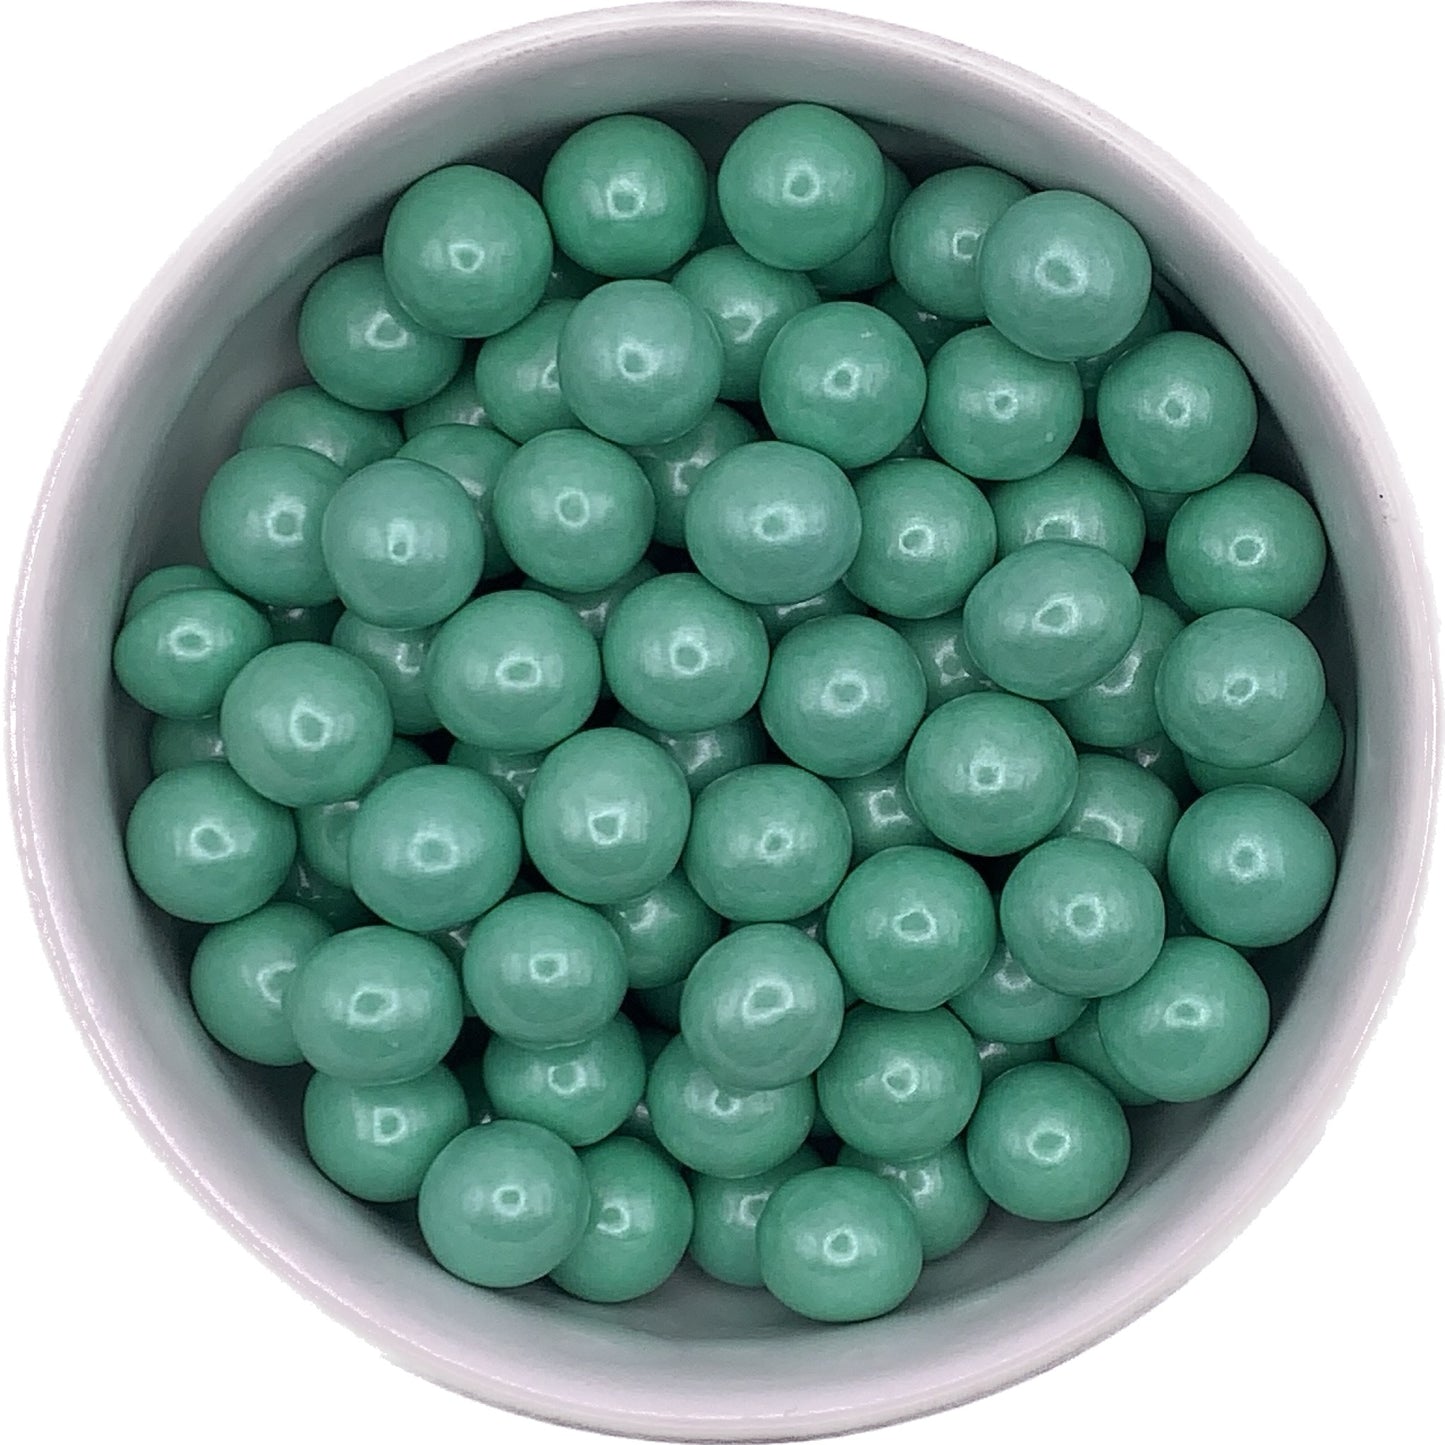 Turquoise sixlets candies